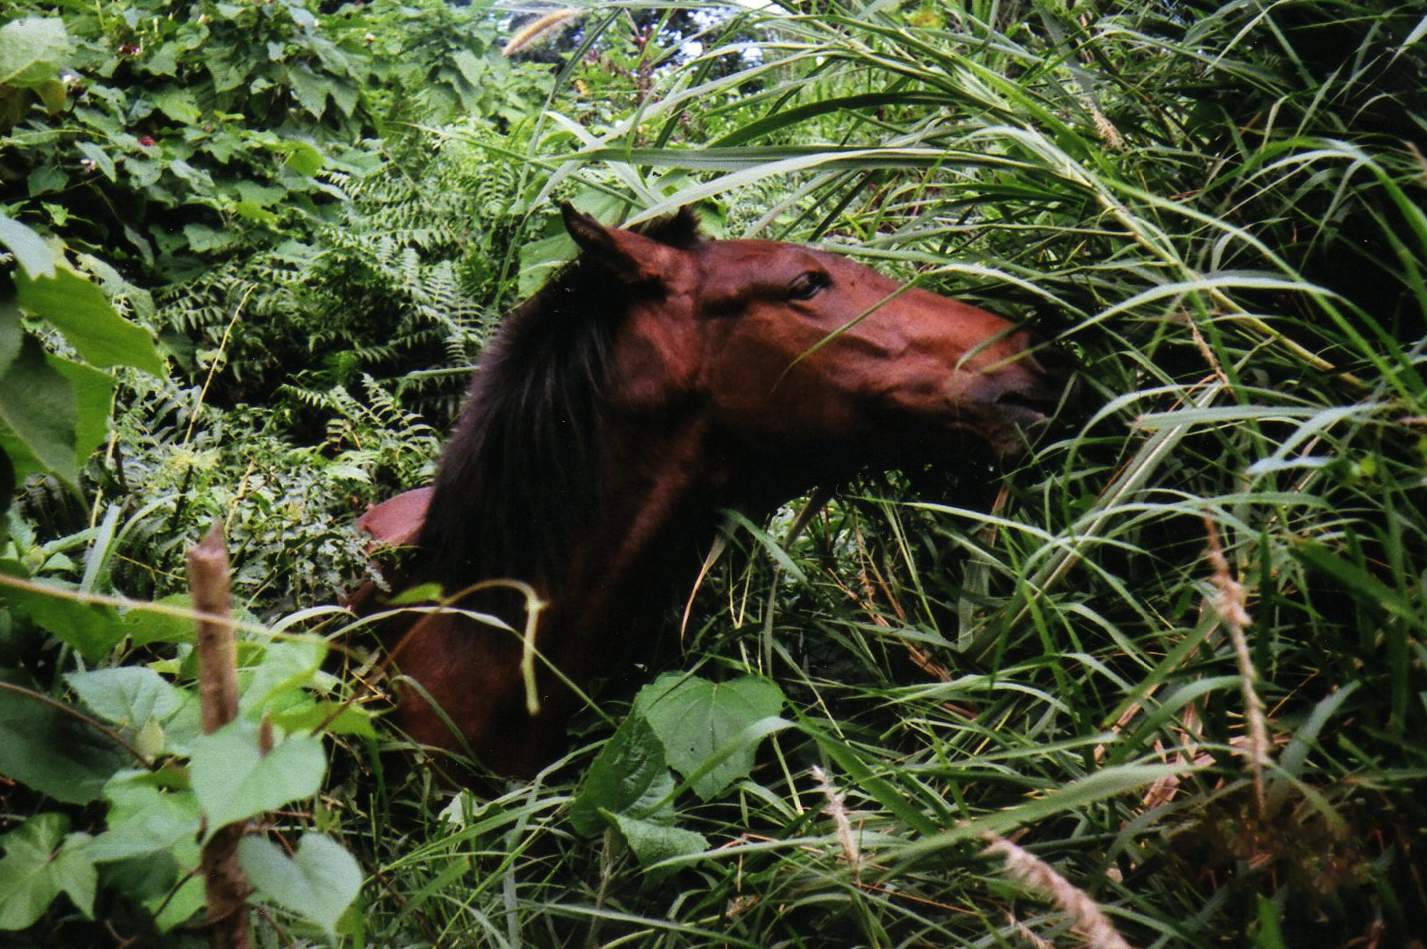 horse emerges from tropical foliage